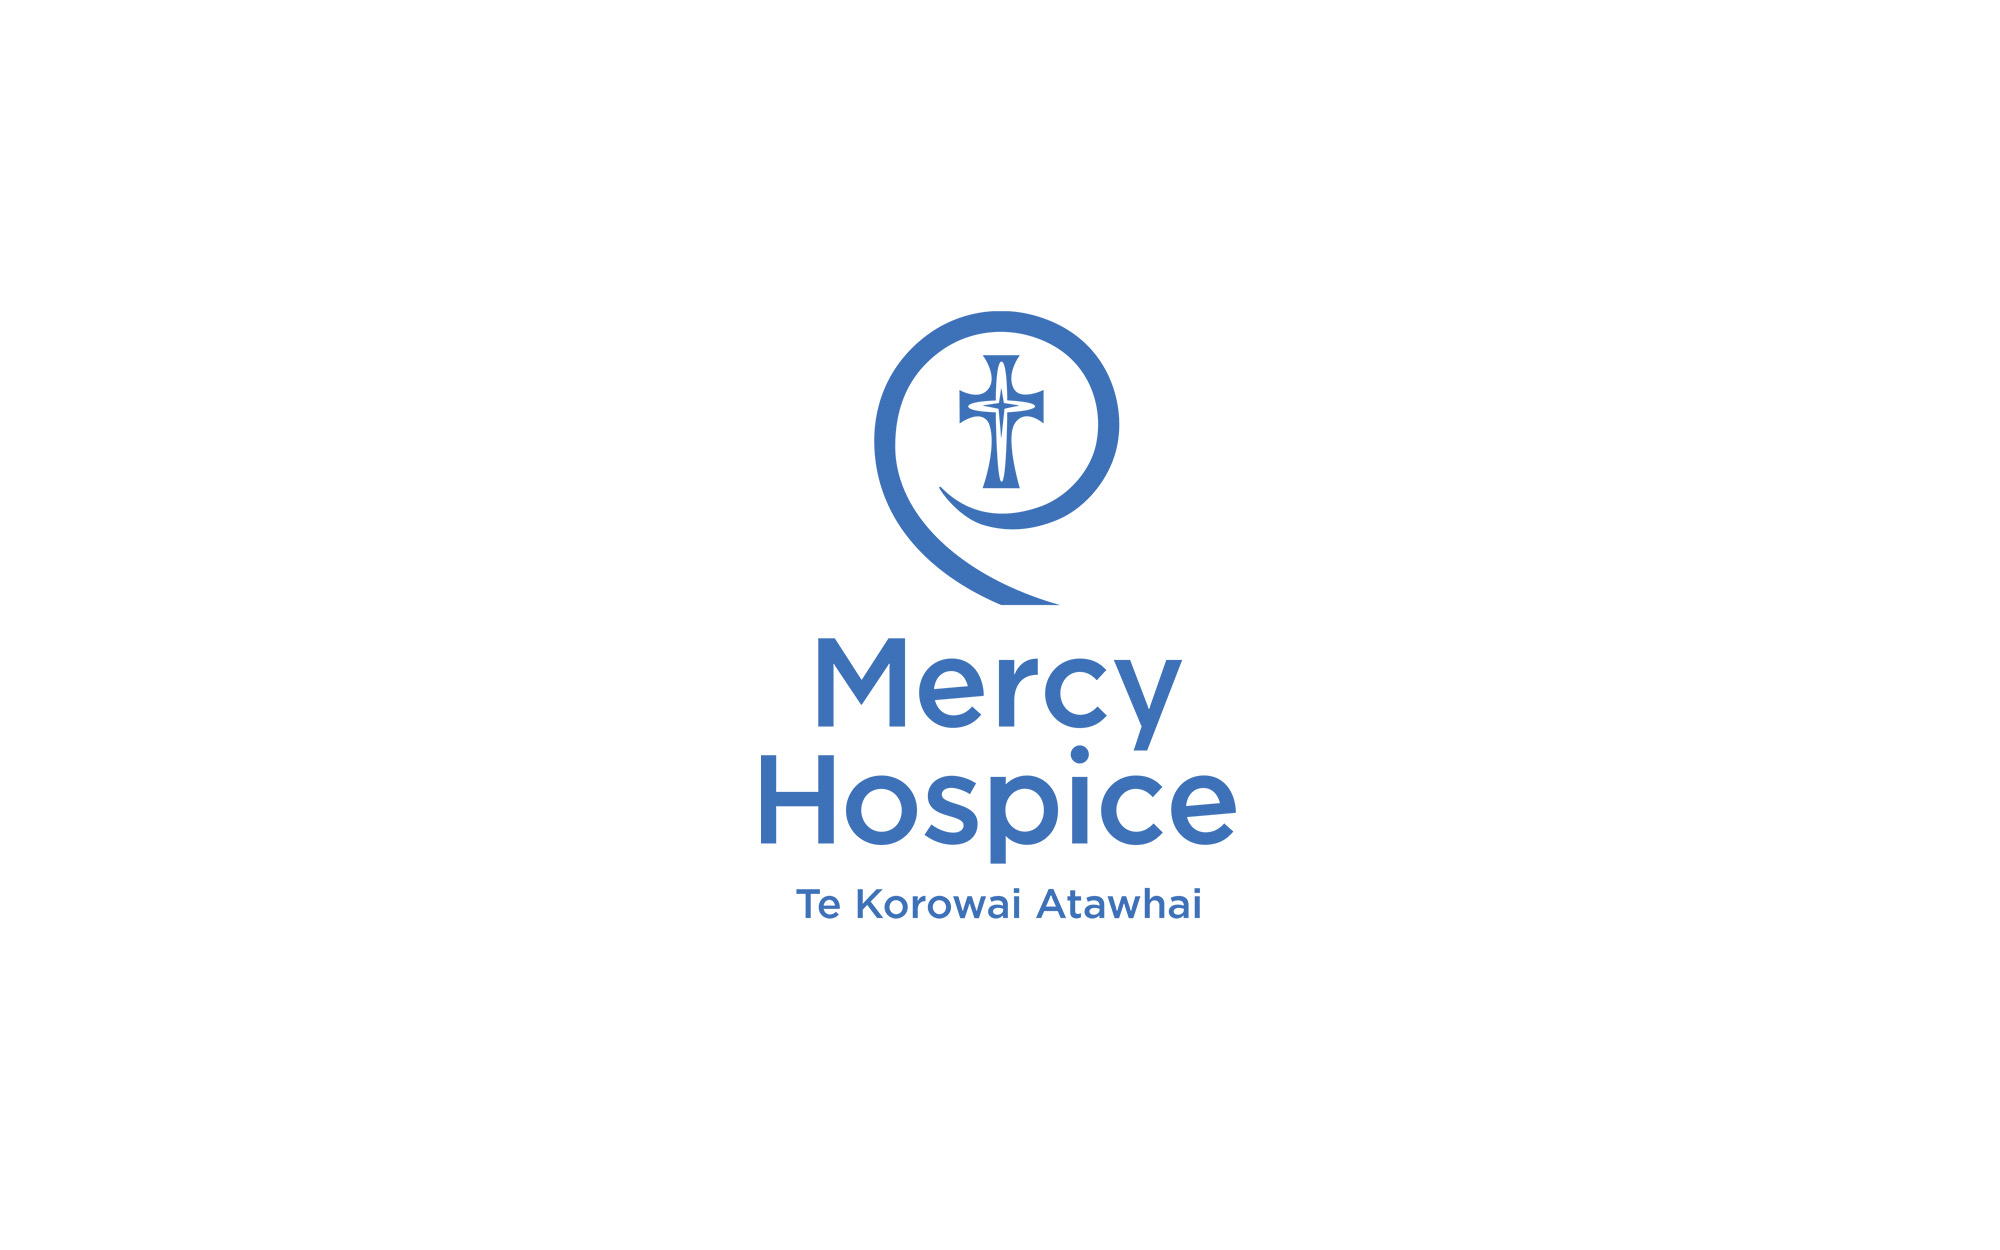 Rebranding for Mercy Hospice who have a long tradition of providing specialist community palliative care and hospice services.